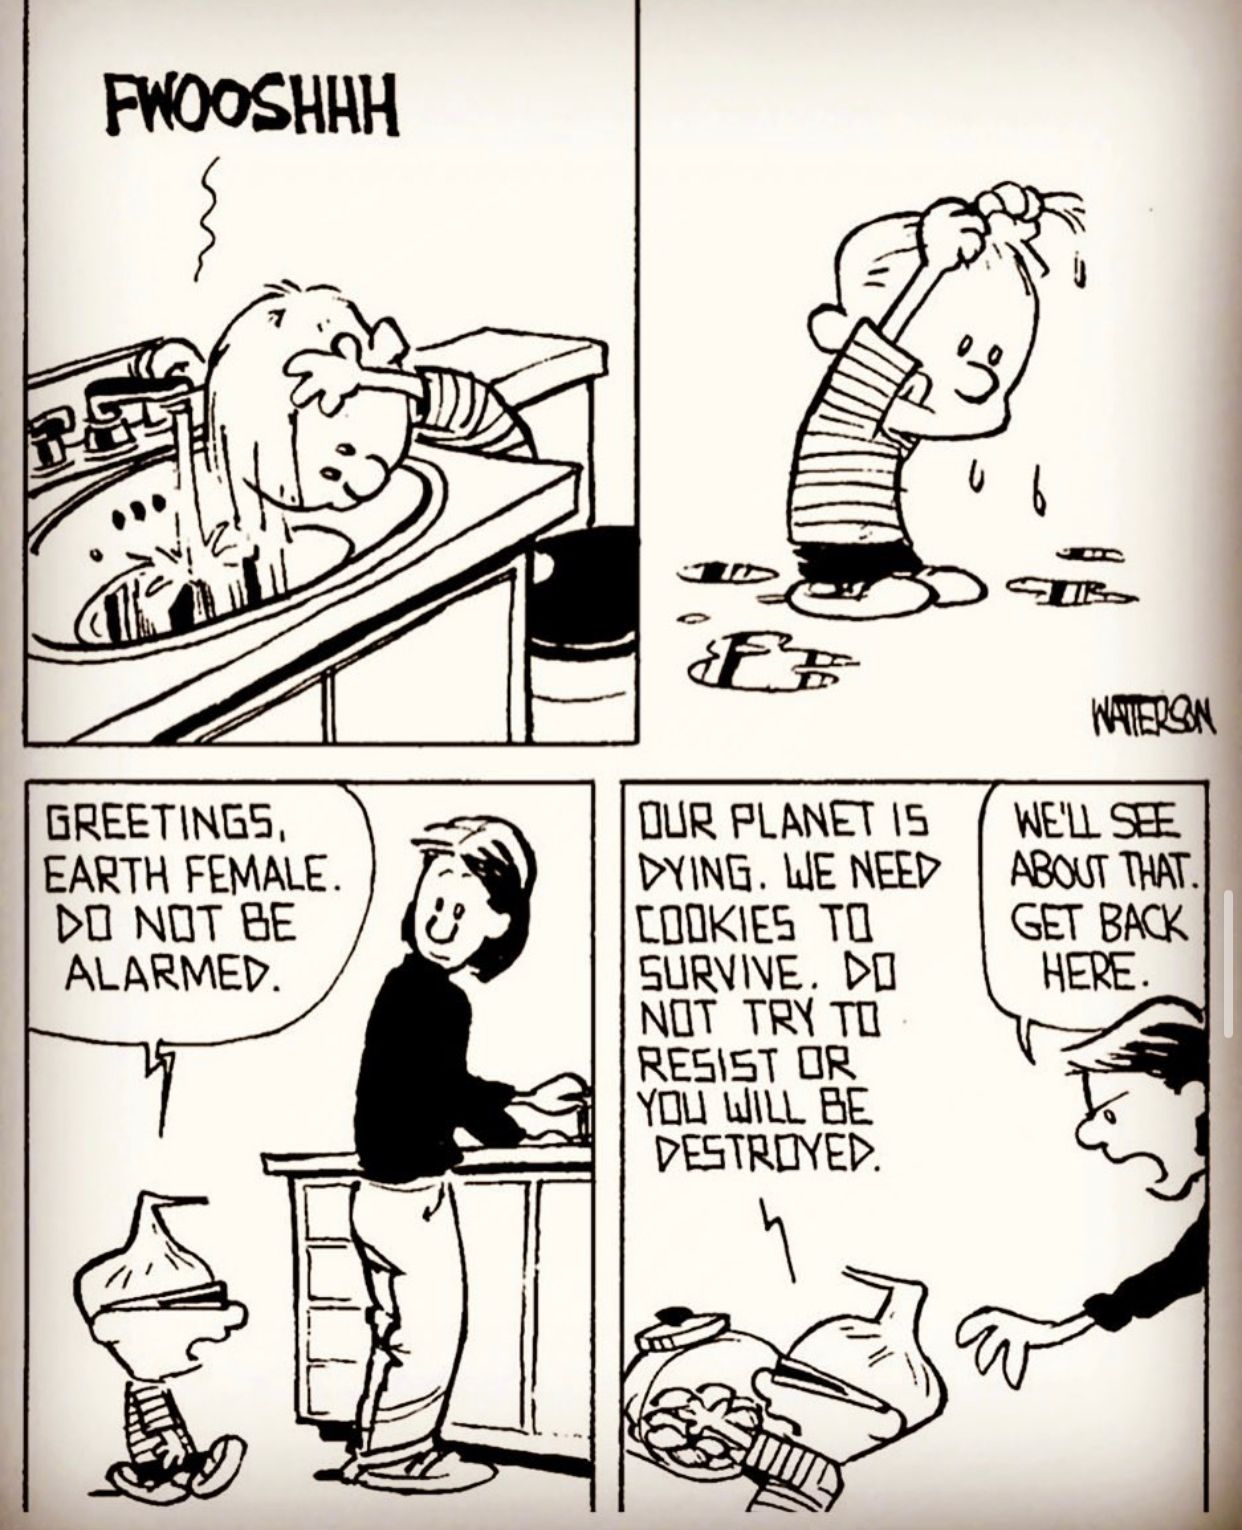 Calvin and Hobbes on Twitter: "Not even aliens can resist some homemade  cookies! 🍪 #calvinandhobbes https://t.co/kOC5ySM8w1" / Twitter